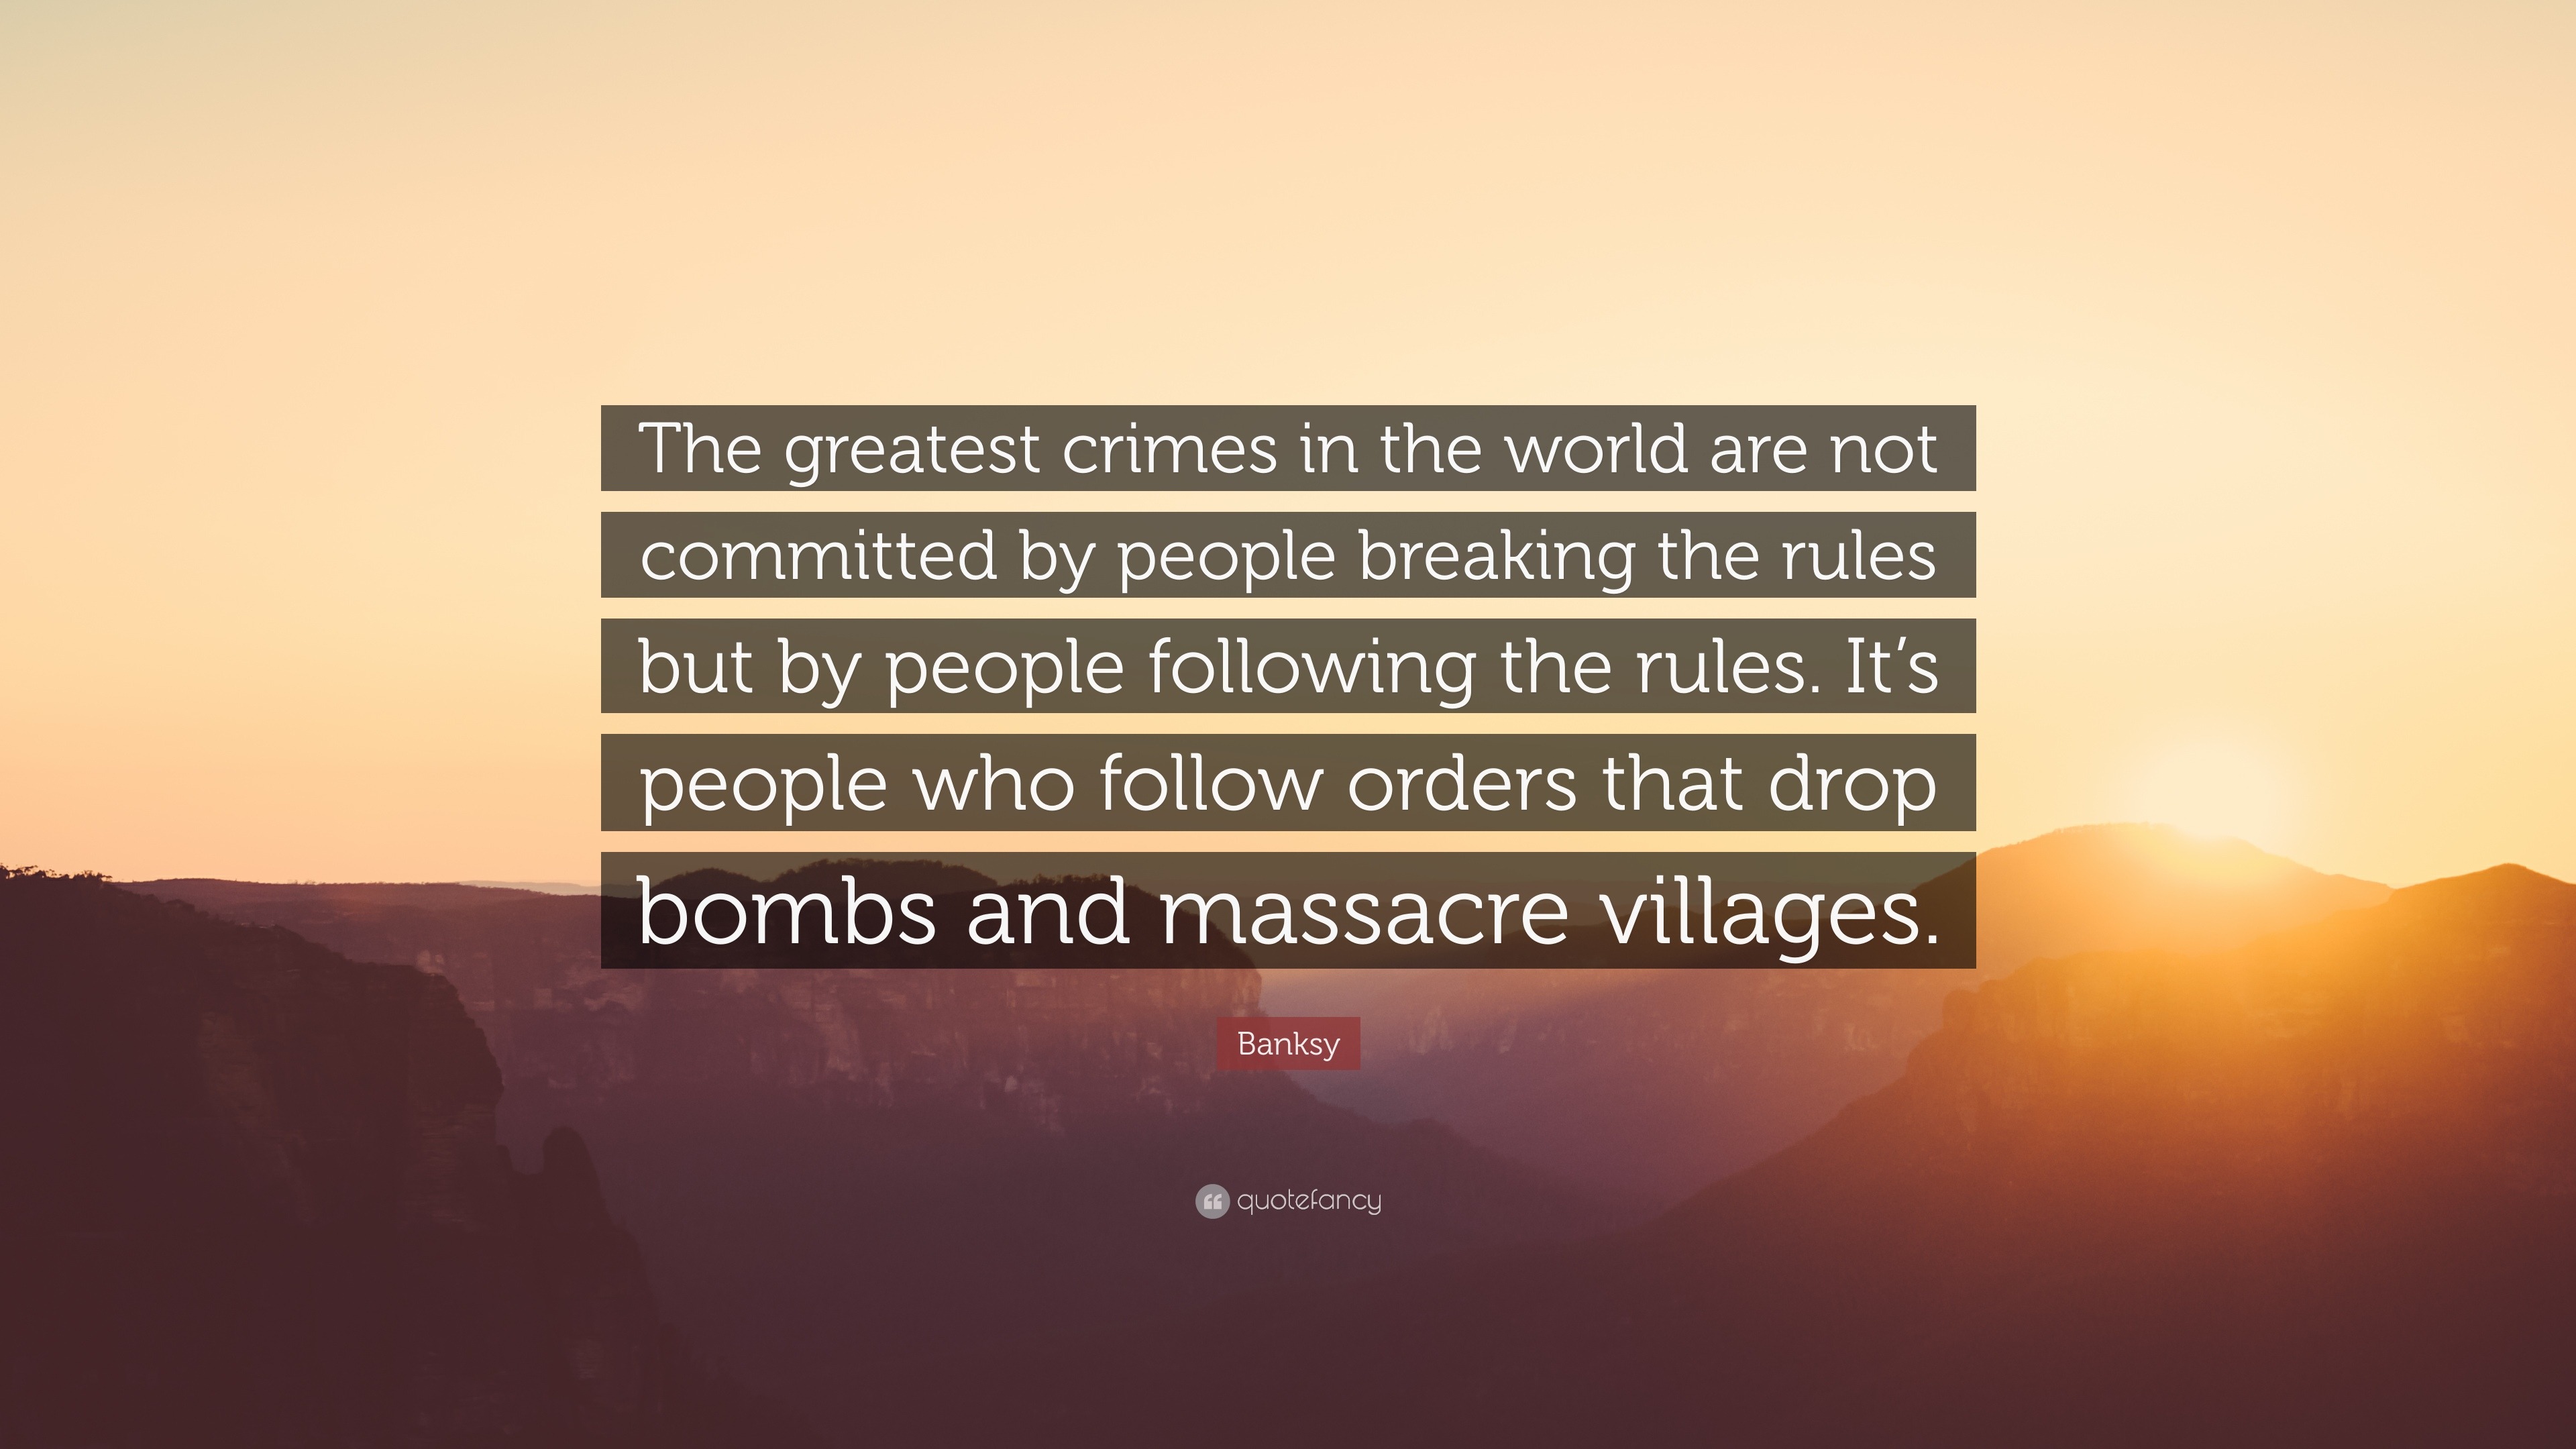 The greatest crimes in the world are not committed by people breaking the  rules Banksy [752x402] : r/QuotesPorn